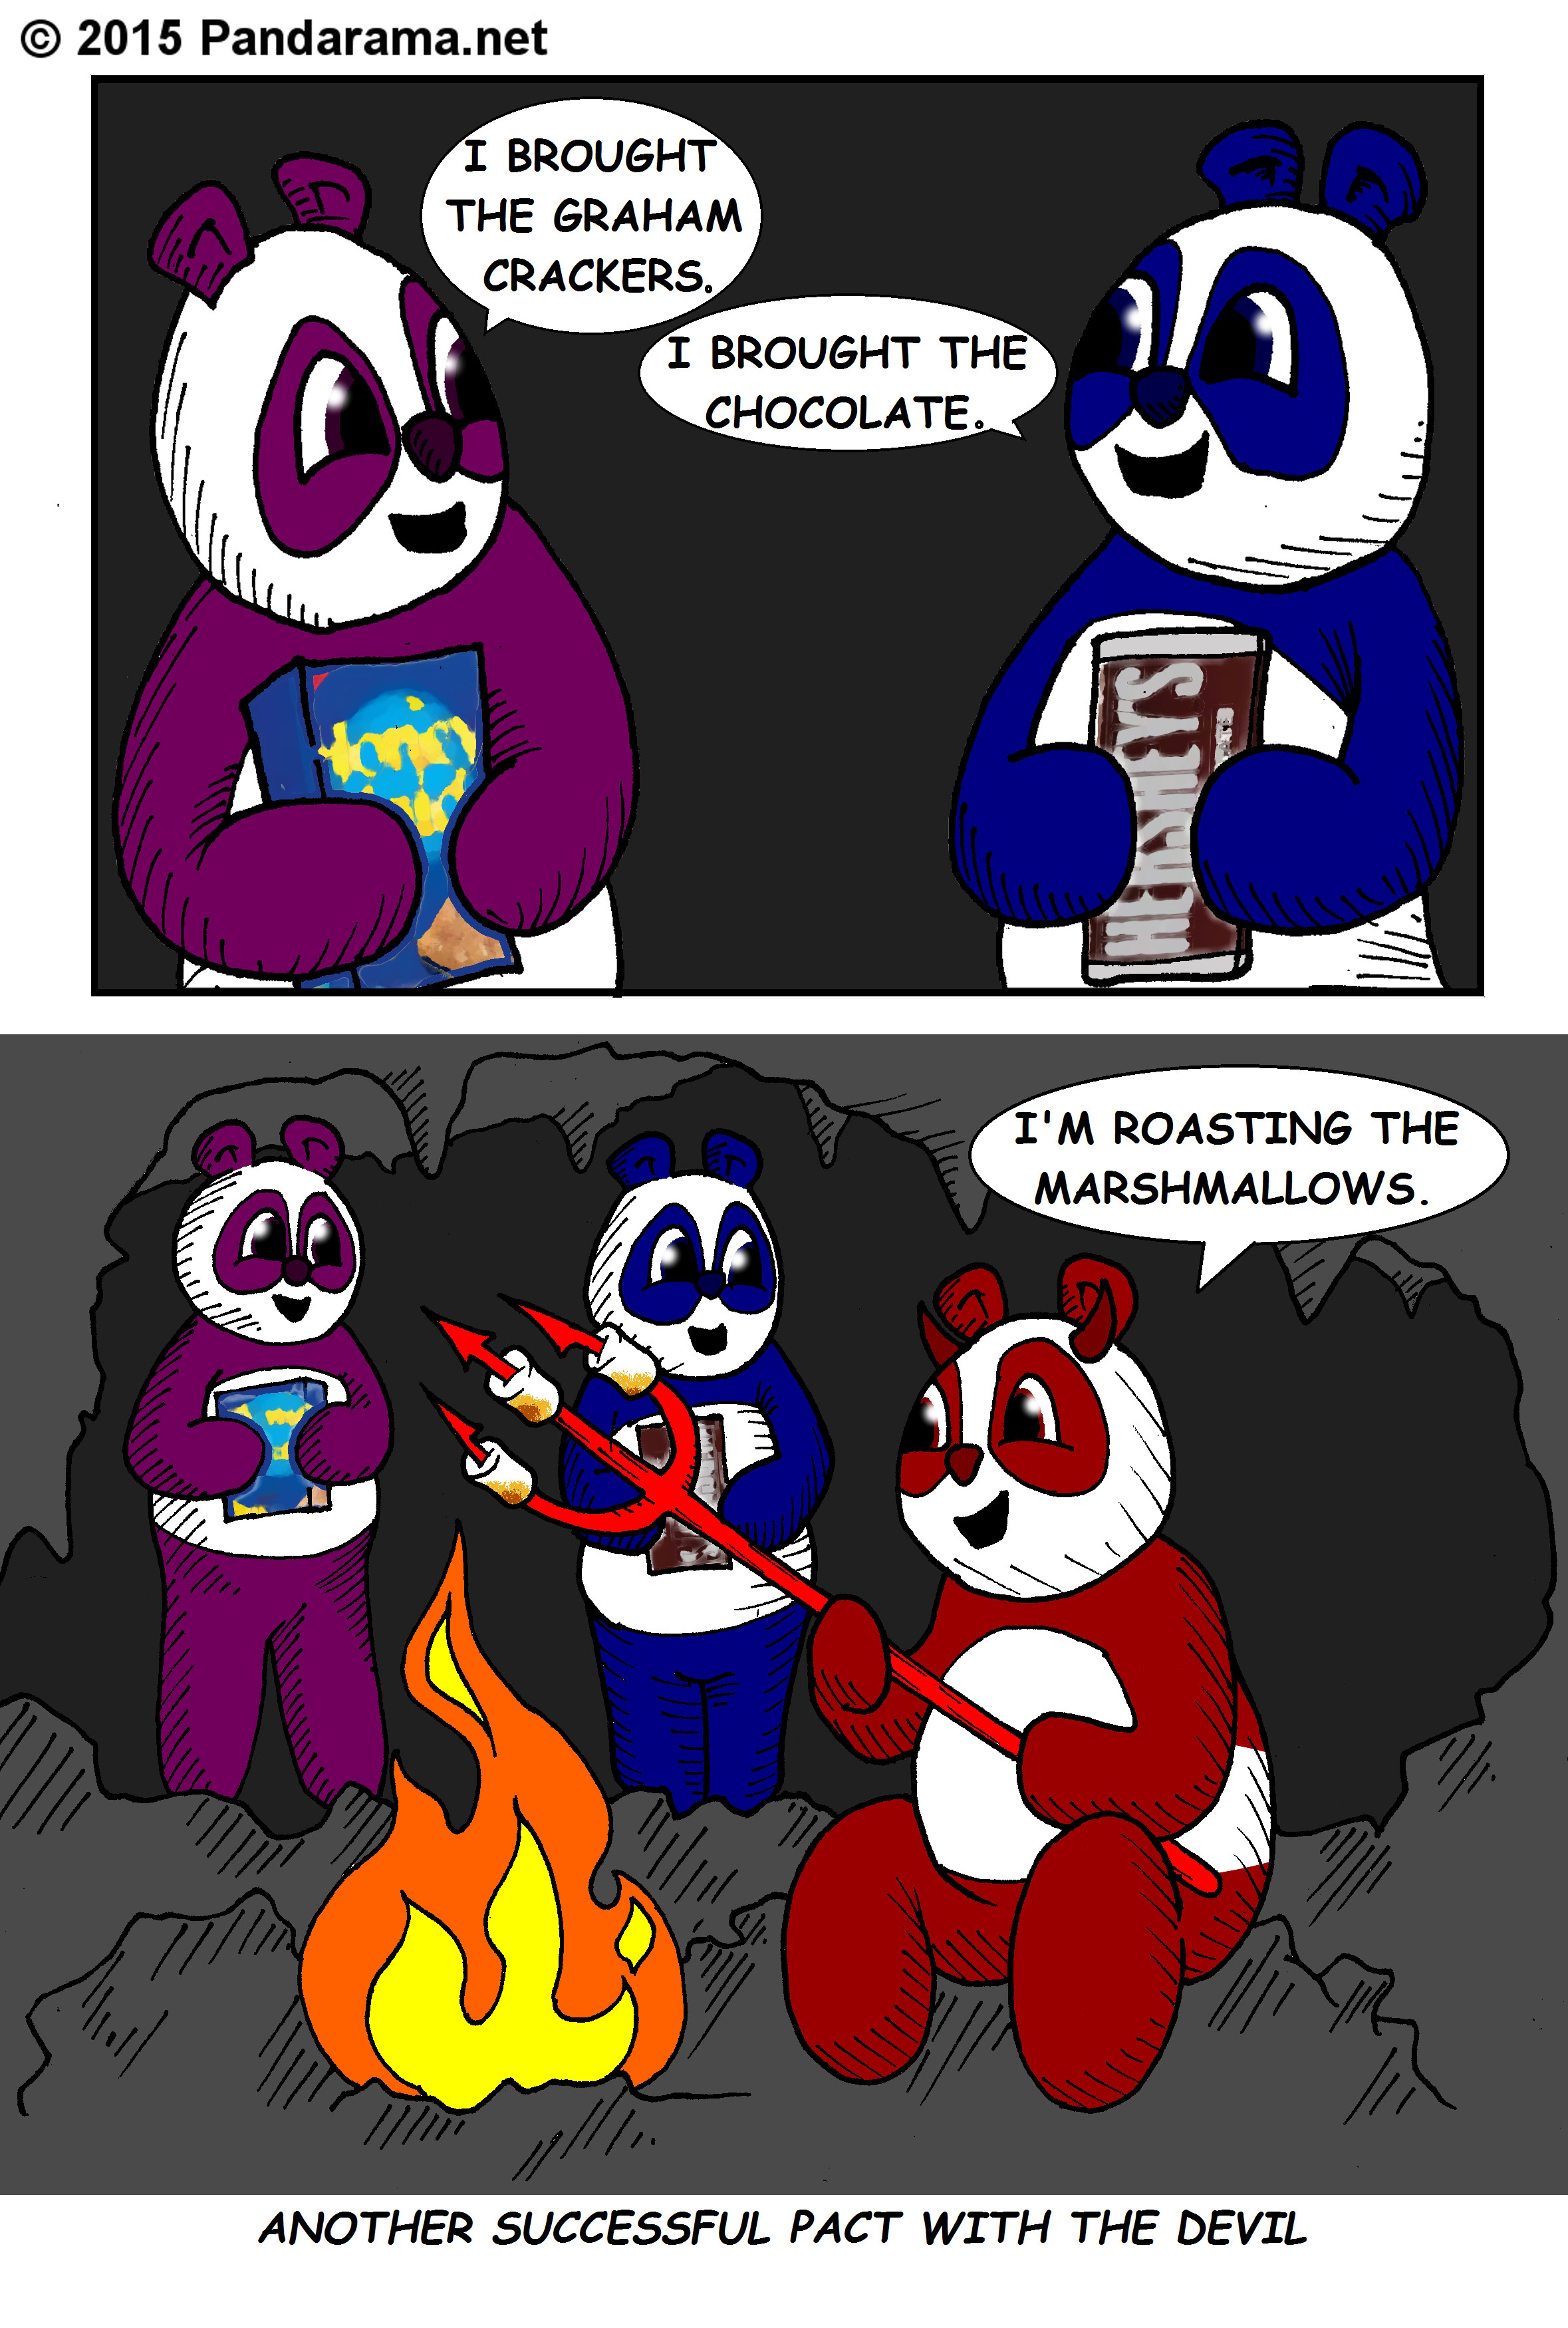 pact with the devil. black mass cartoon. s'more cartoon. smores cartoon. cartoon smore. camping comic. how to make a pact with the devil. how to sell your soul. two pandas make a pact with the devil; one brings chocolate, one brings graham crackers, and the devil toasts marshmallows on his pitchfork.